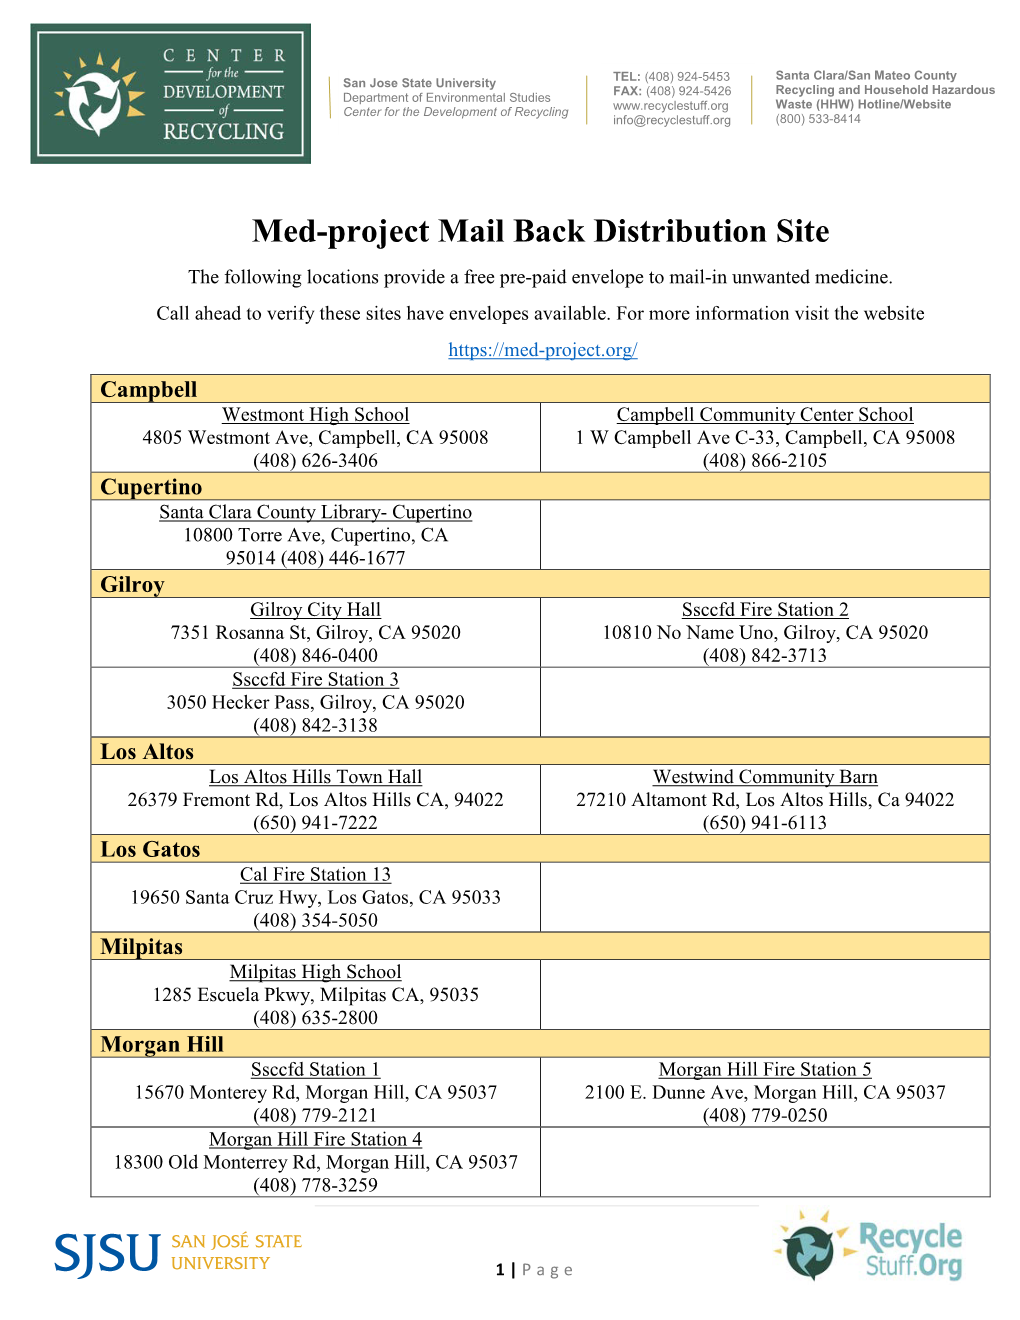 Med-Project Mail Back Distribution Site the Following Locations Provide a Free Pre-Paid Envelope to Mail-In Unwanted Medicine